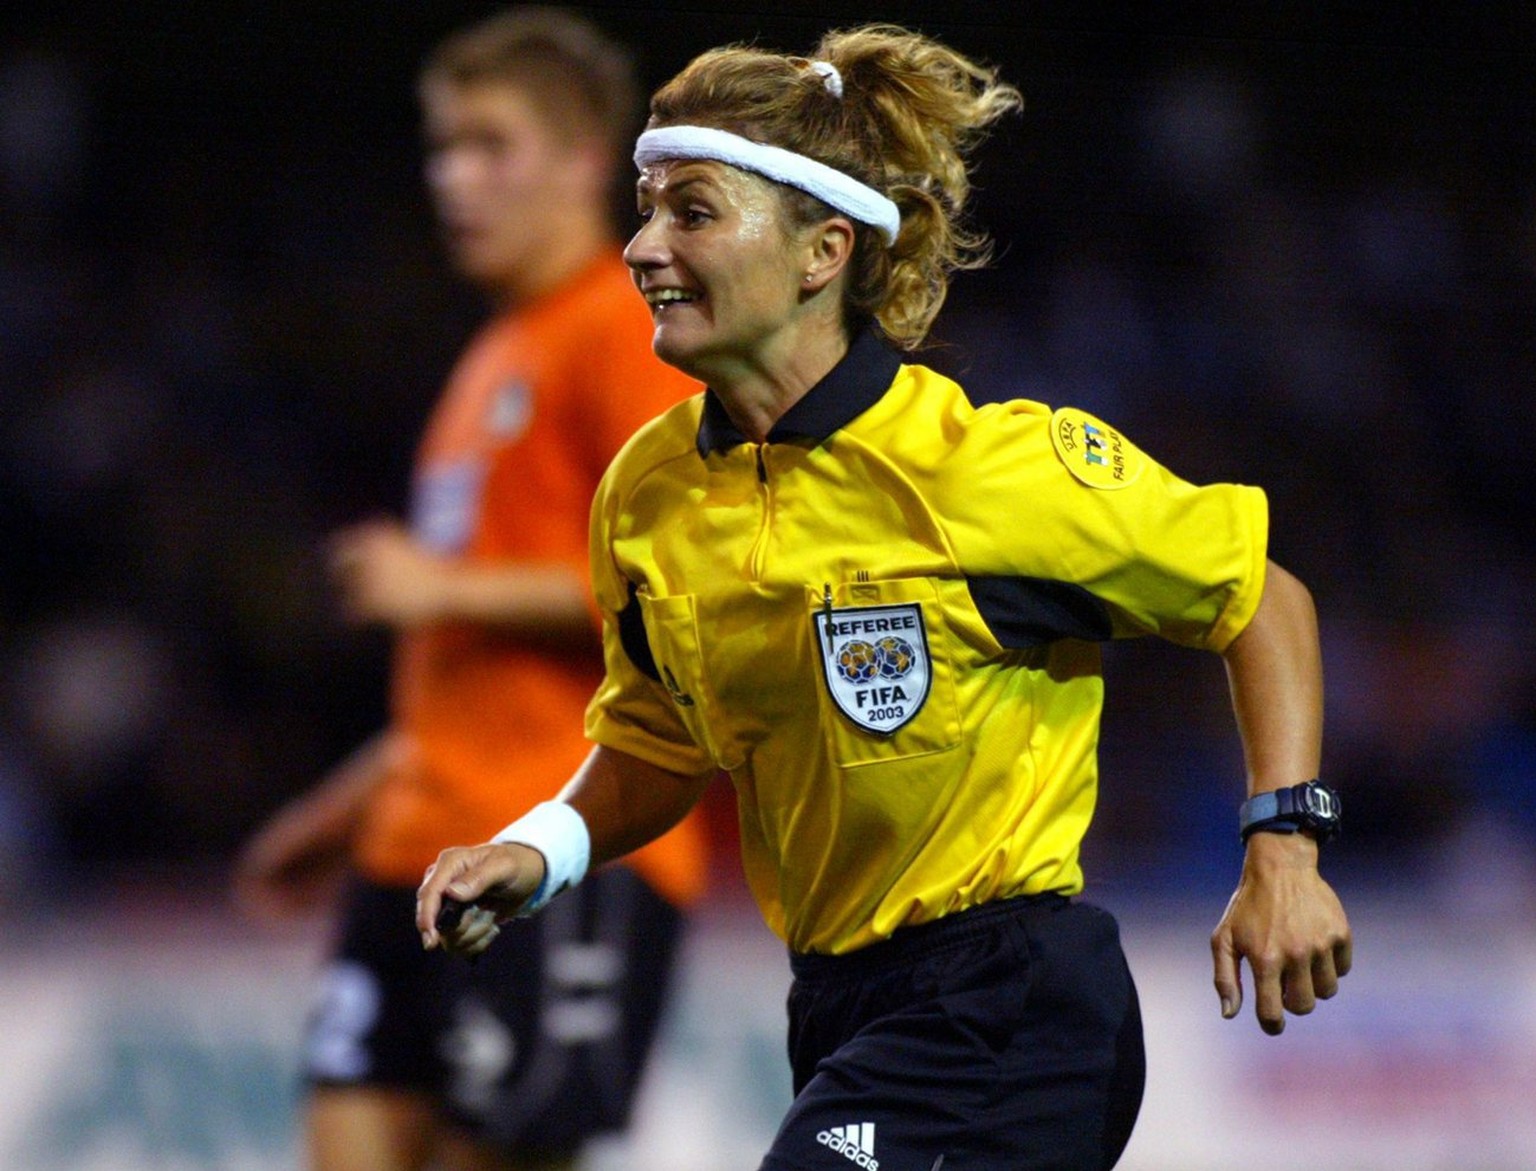 Swiss referee Nicole Petignat in action during the UEFA Cup qualifying round 1st leg soccer match of AIK Solna vs Fylkir from Iceland in Stockholm, Thursday 14 August 2003. Petignat is the first femal ...